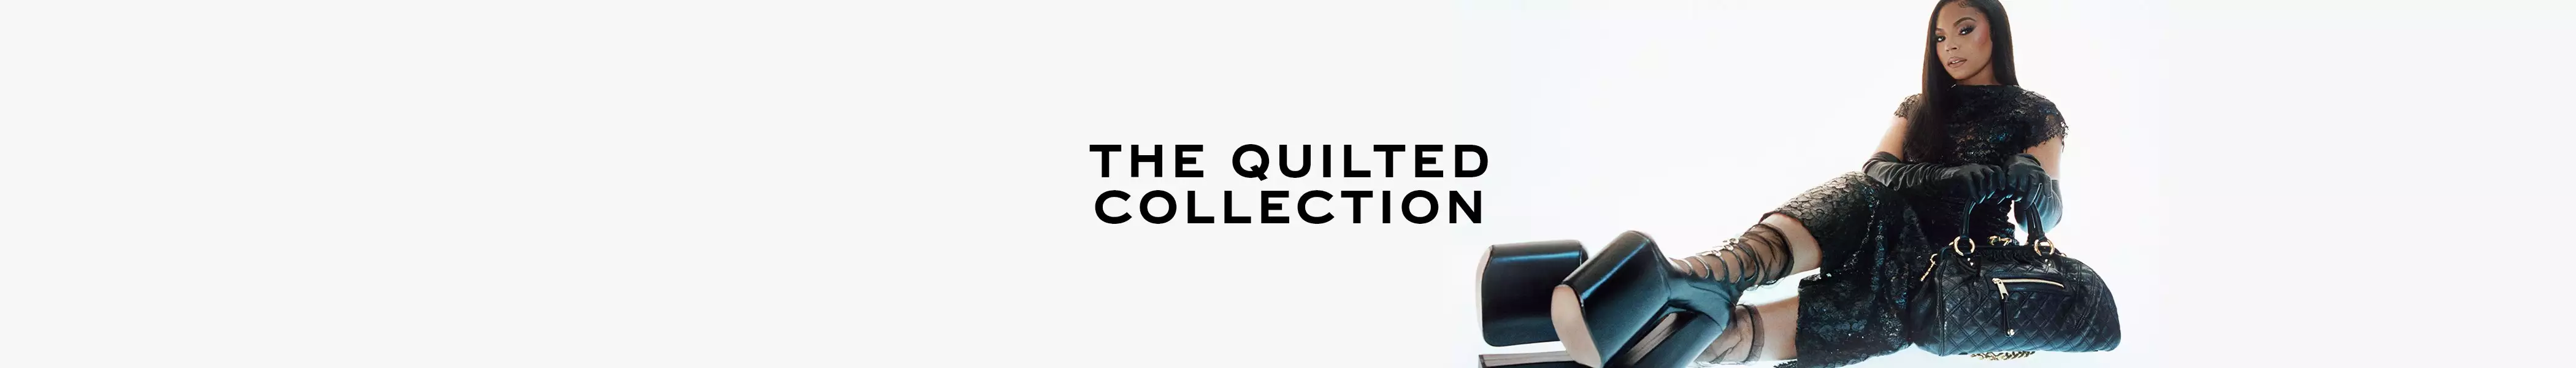 The Quilted Collection